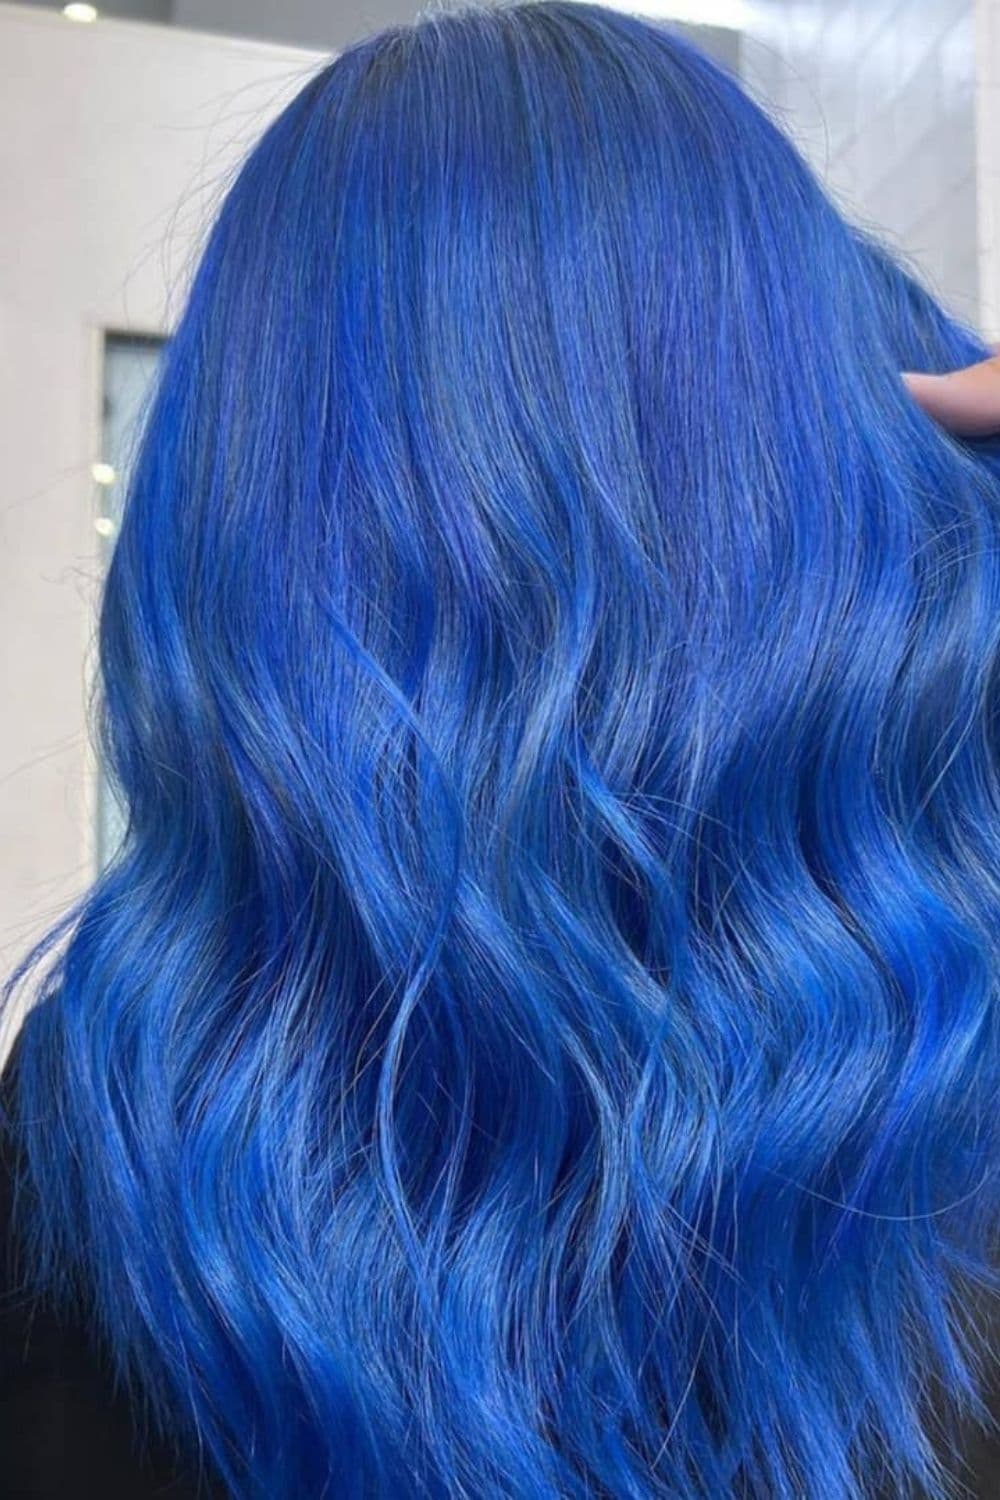 A woman with long royal blue hair with beach waves.